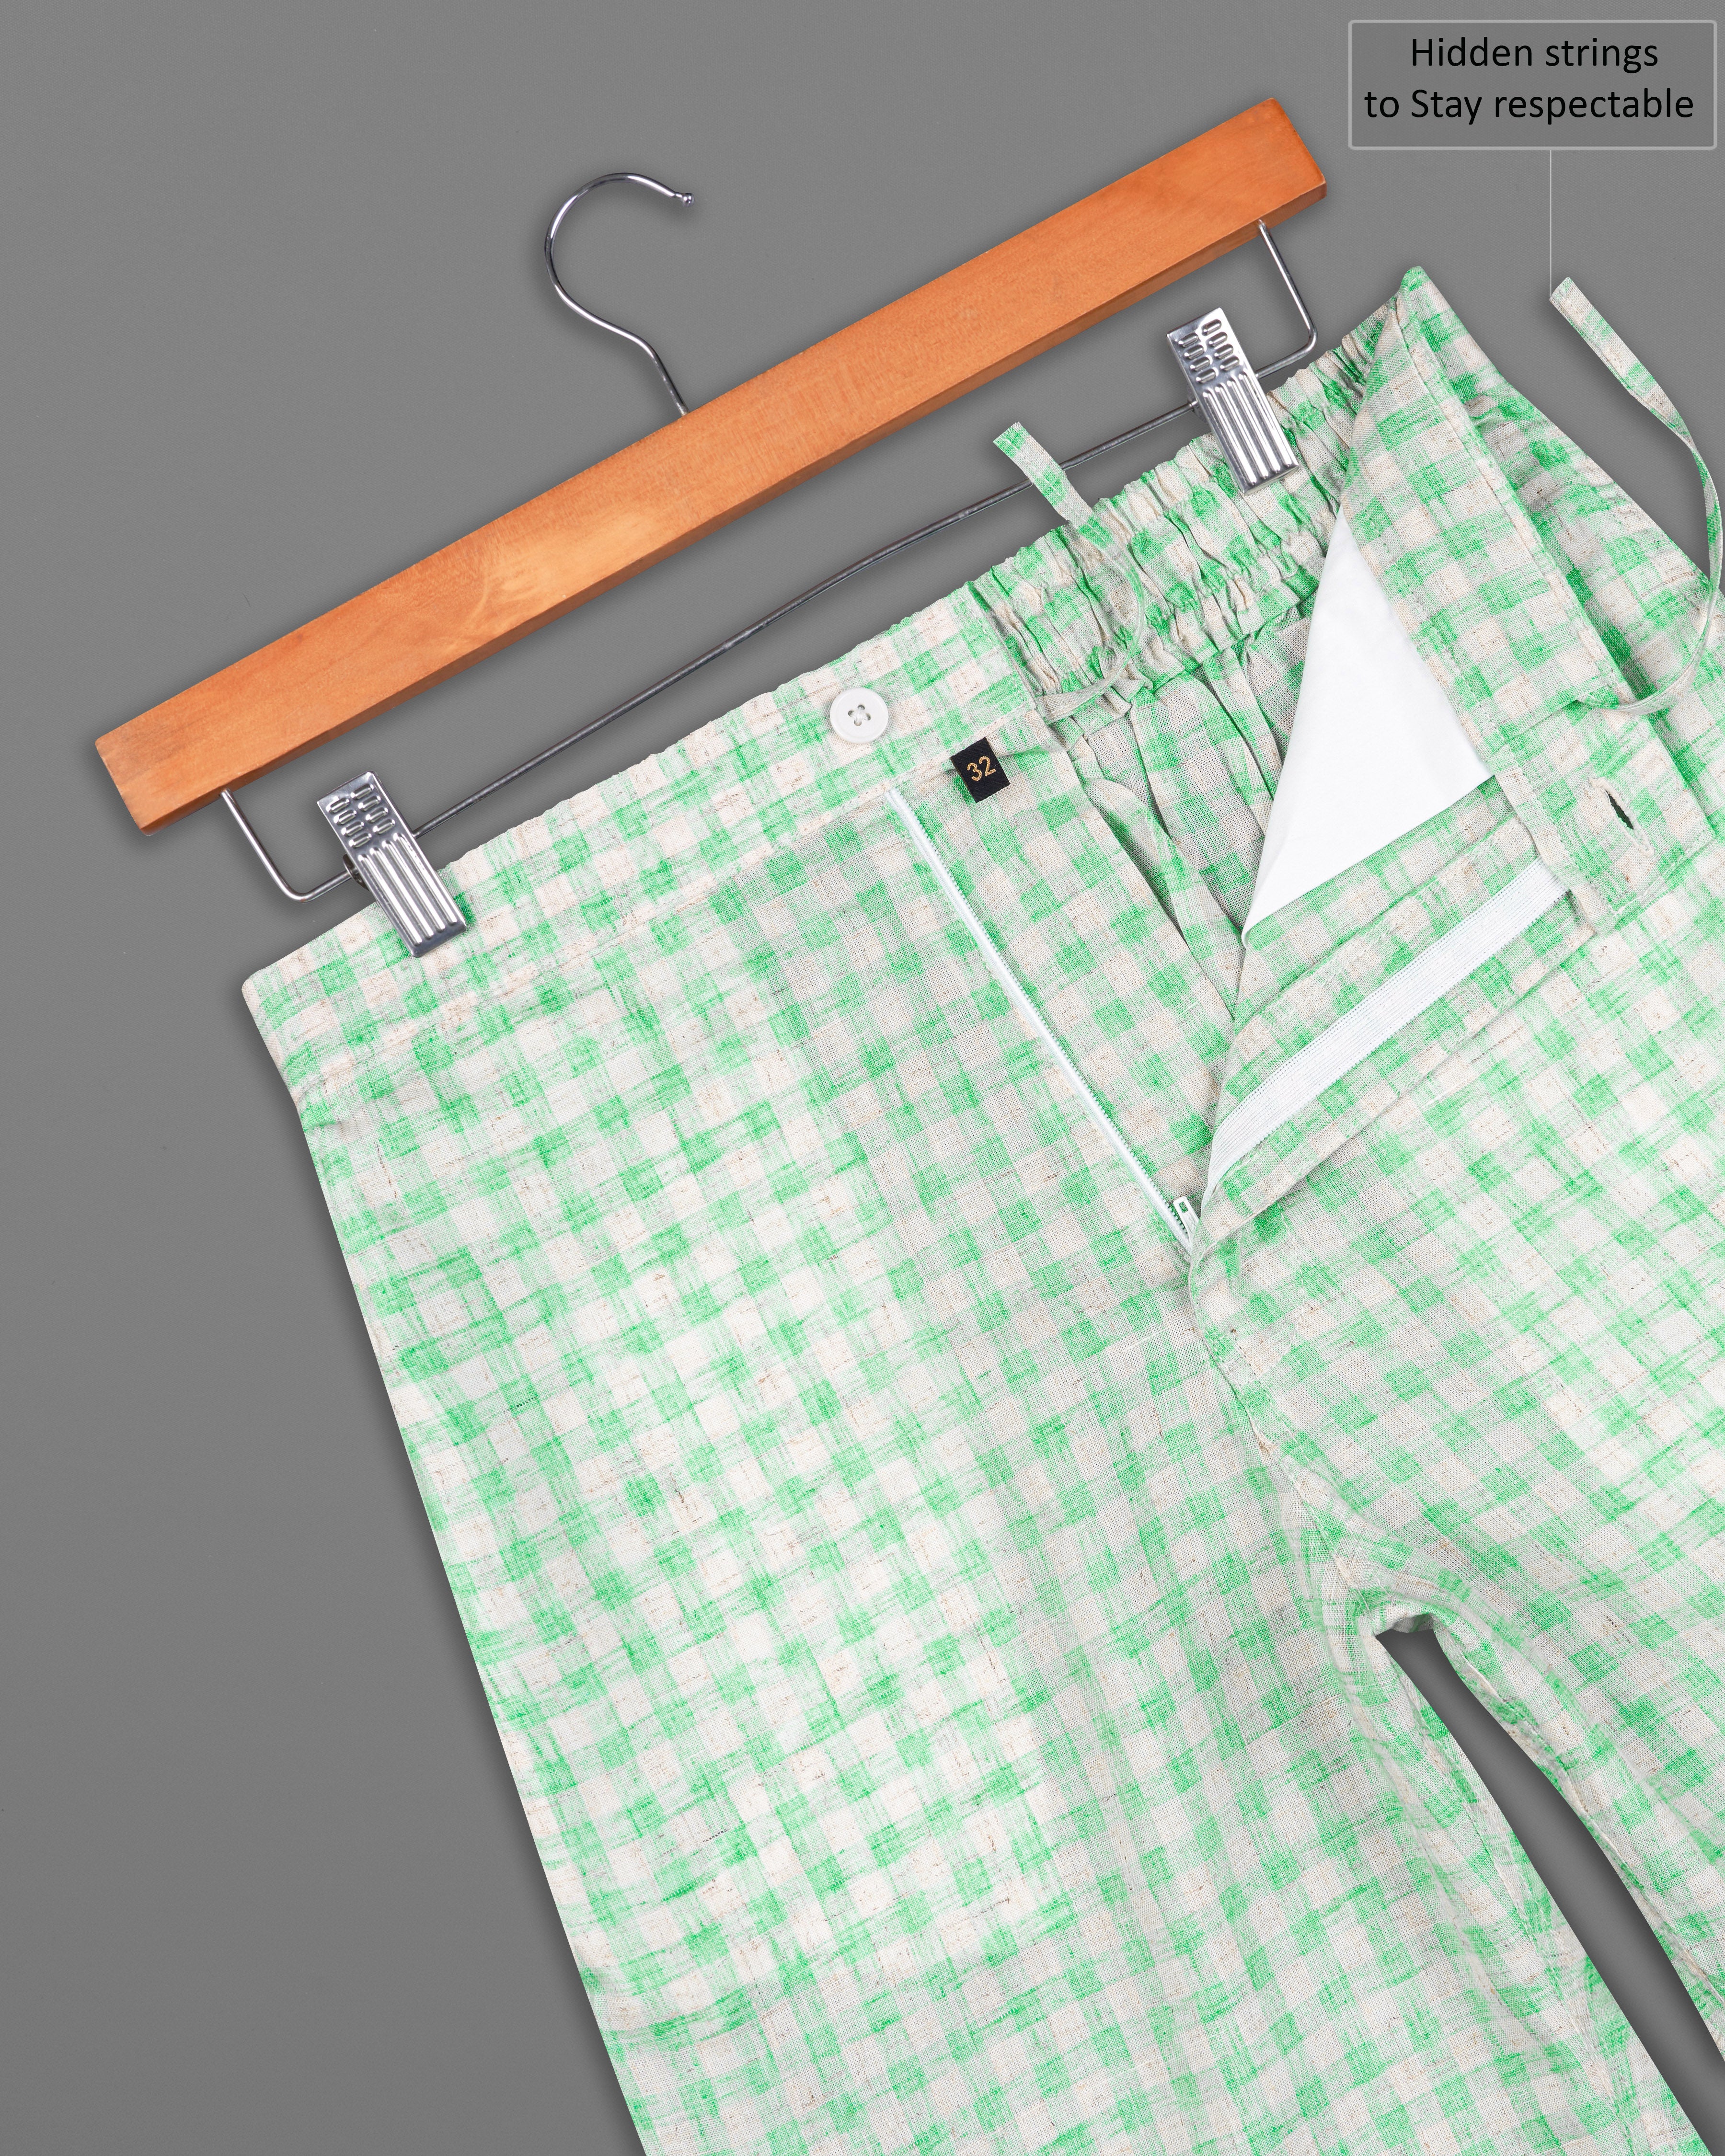 Turquoise Green and Mercury Gray Checkered Luxurious Linen Shorts SR210-28, SR210-30, SR210-32, SR210-34, SR210-36, SR210-38, SR210-40, SR210-42, SR210-44